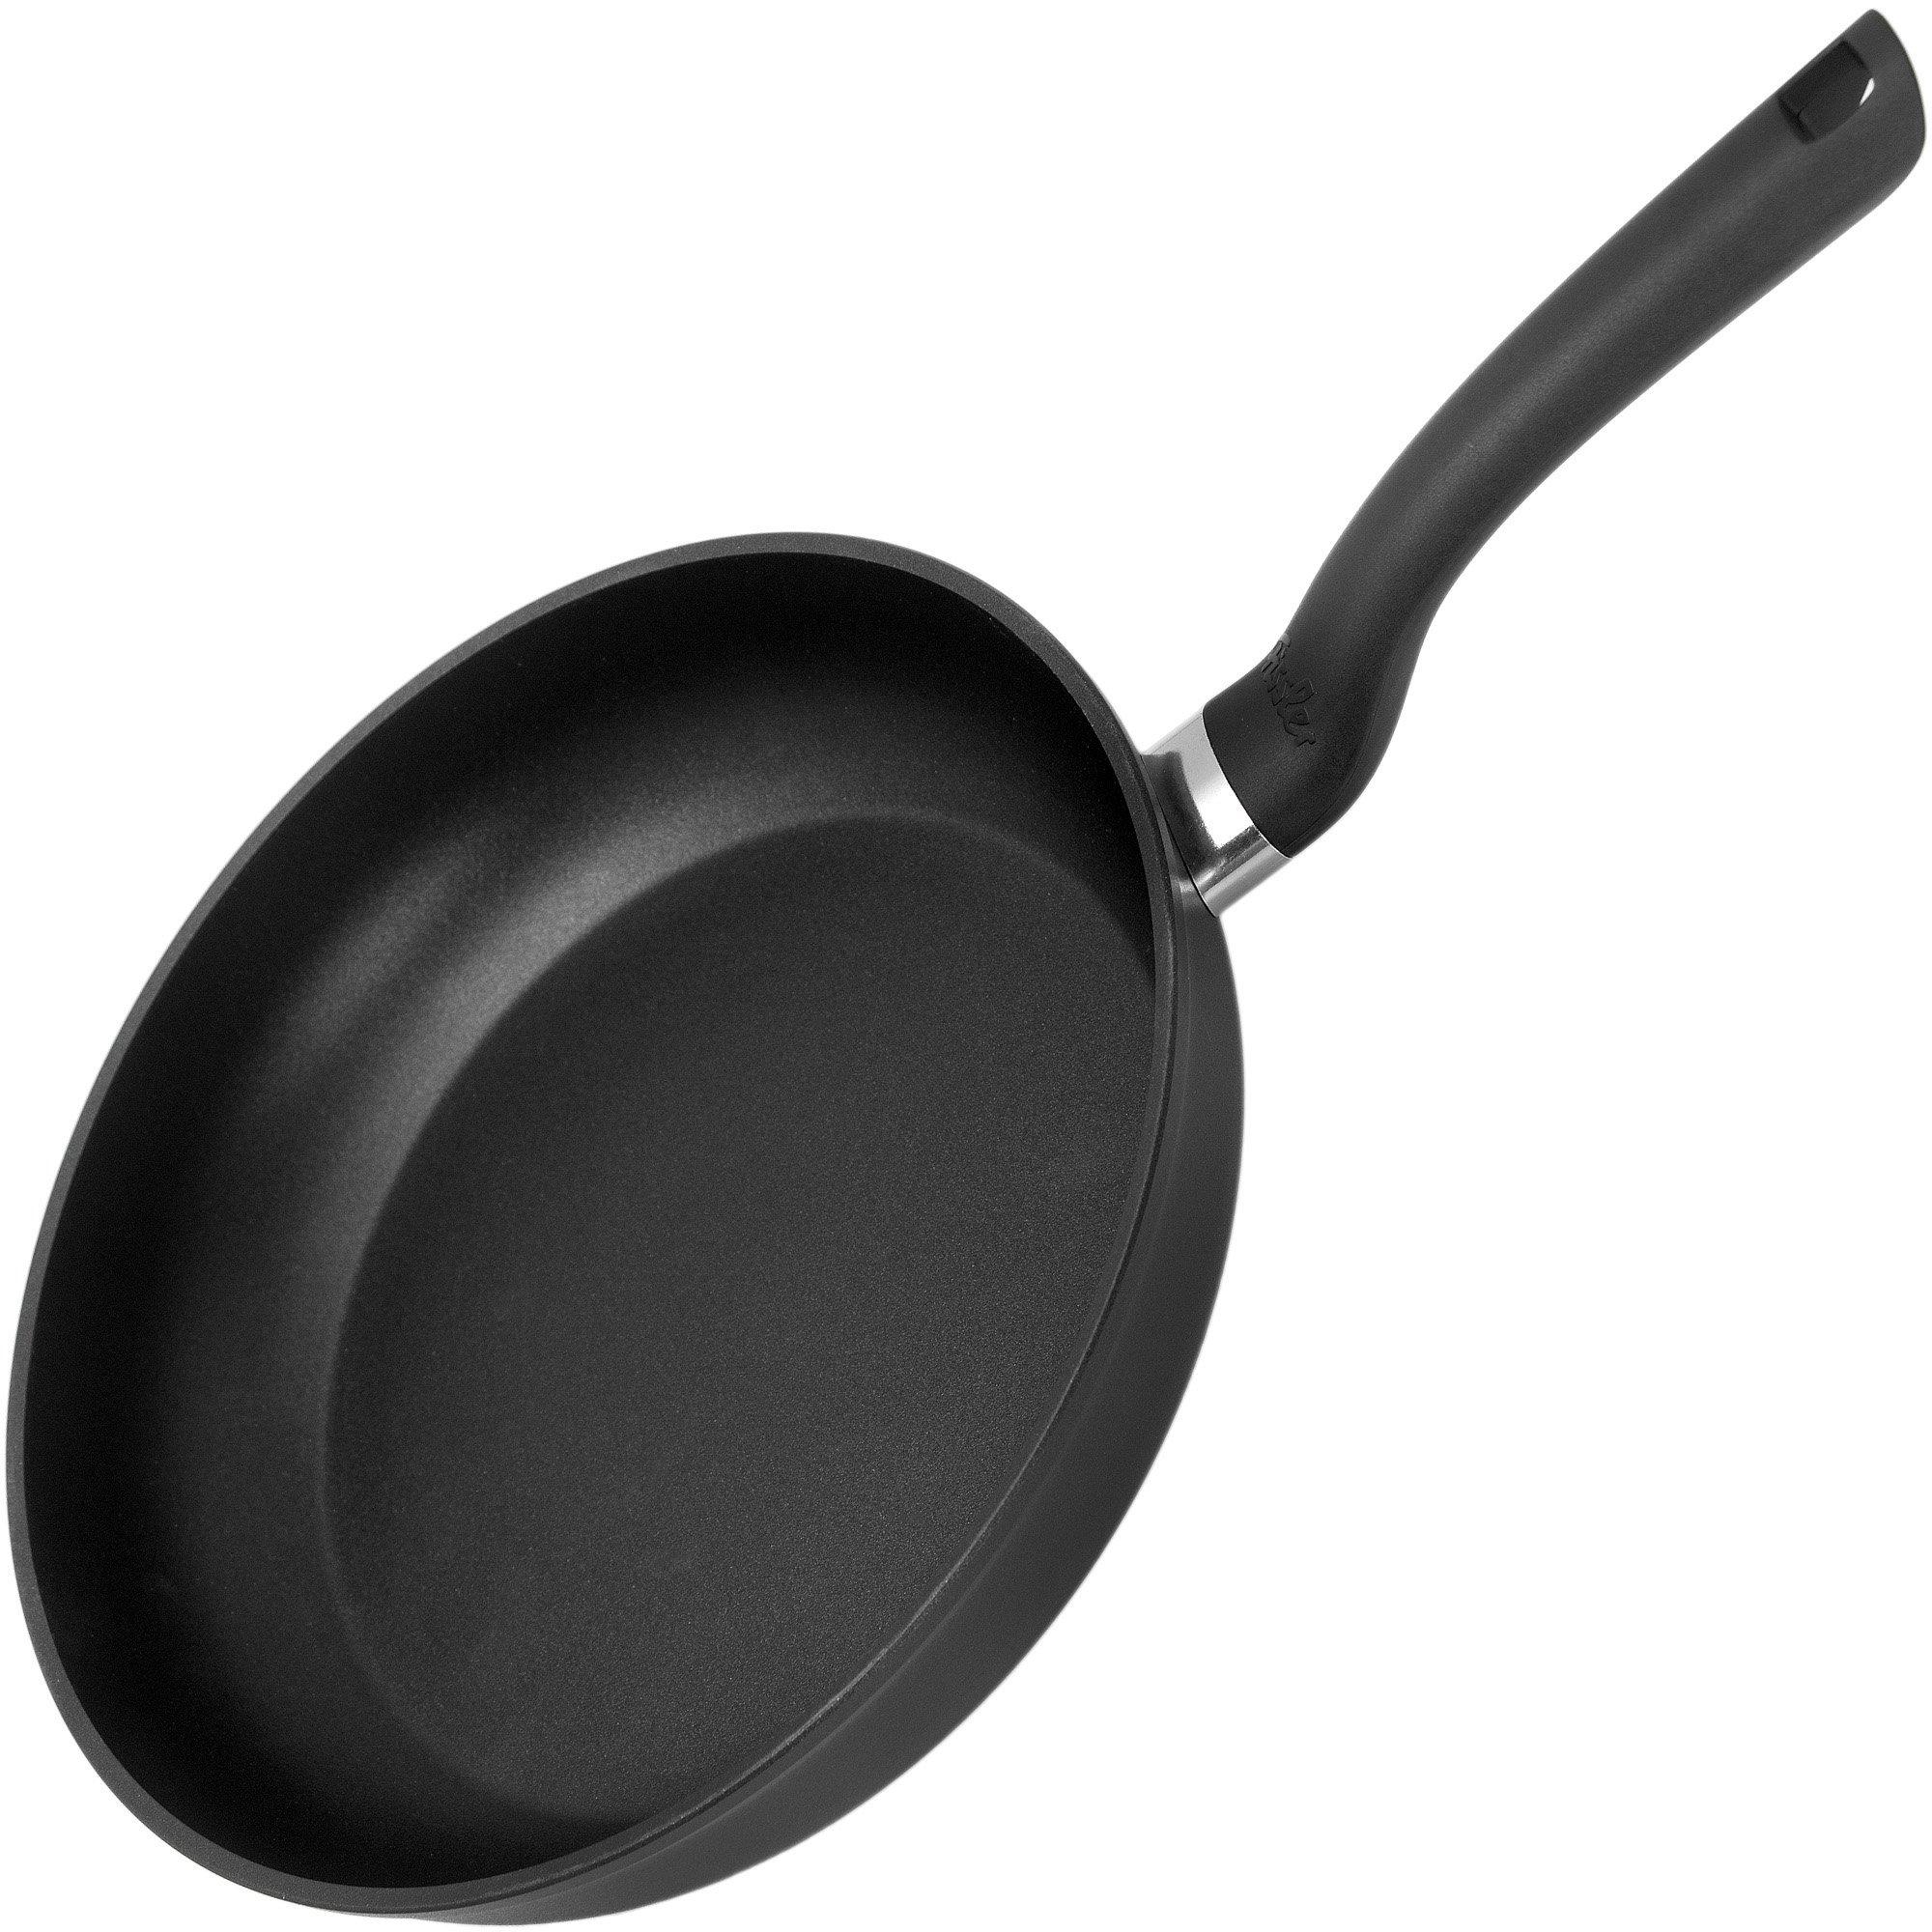 cm Cenit Advantageously Induction 28 pan 045-301-28-100, Fissler frying at shopping |